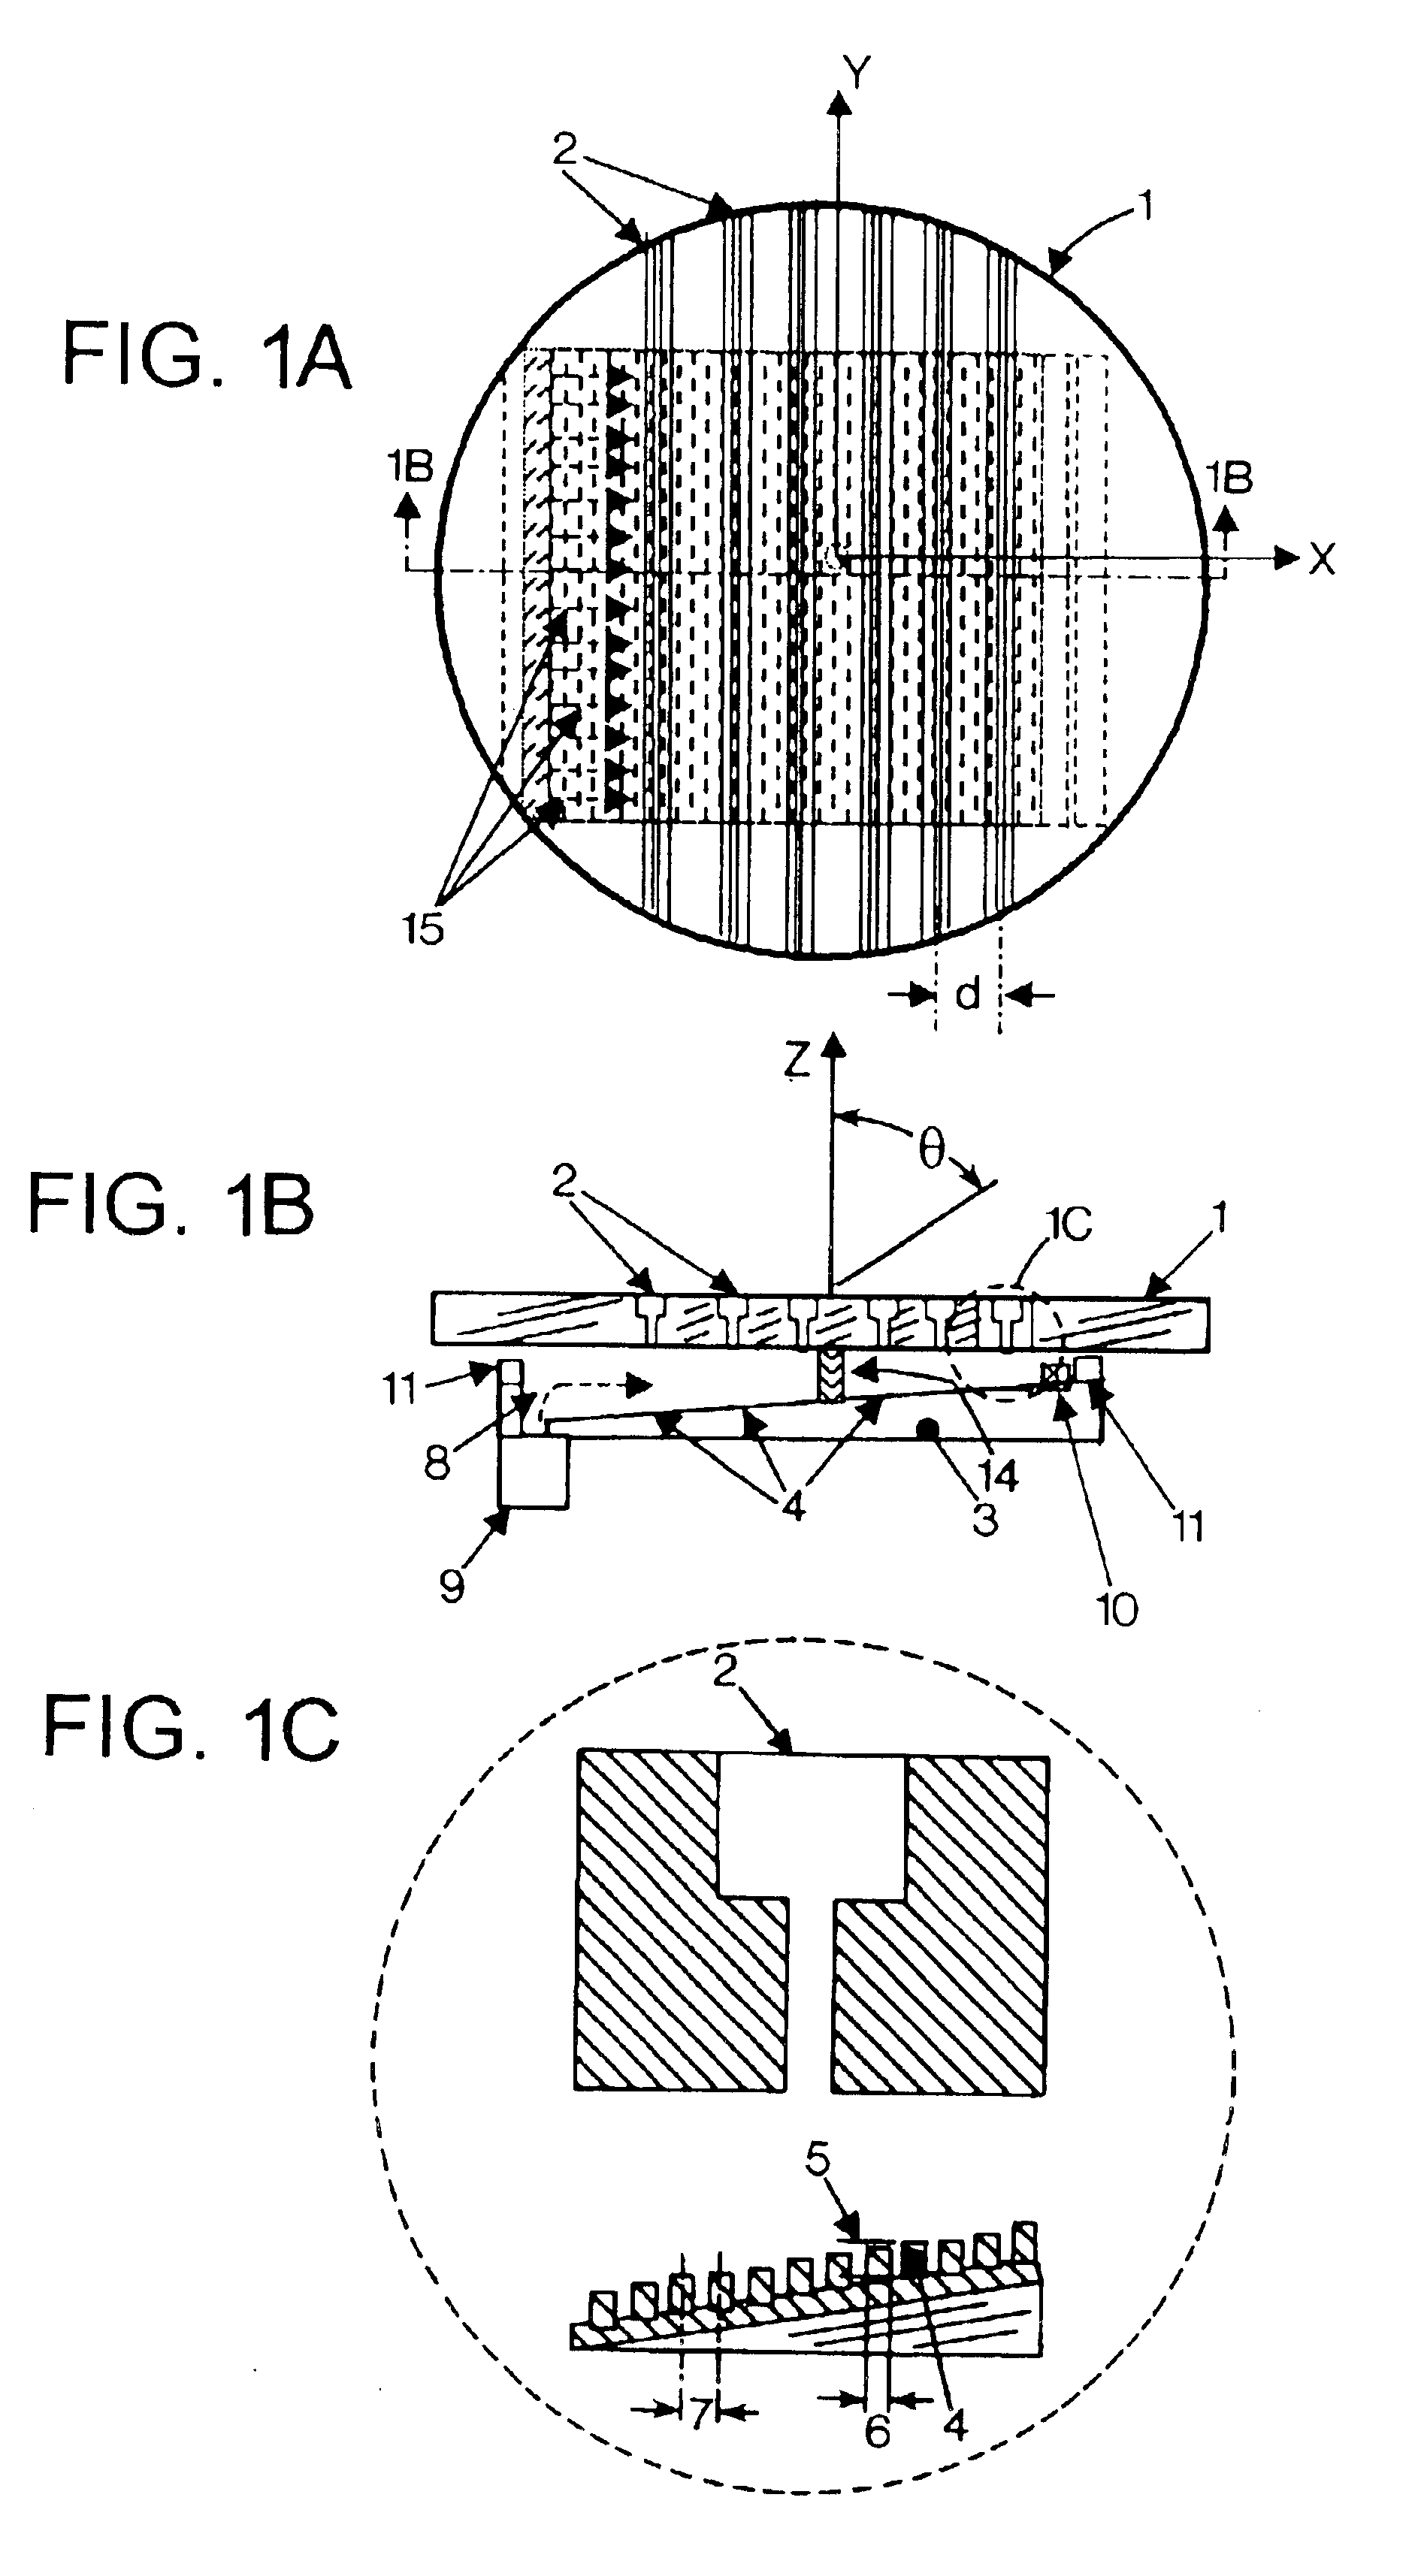 Variable inclination continuous transverse stub array